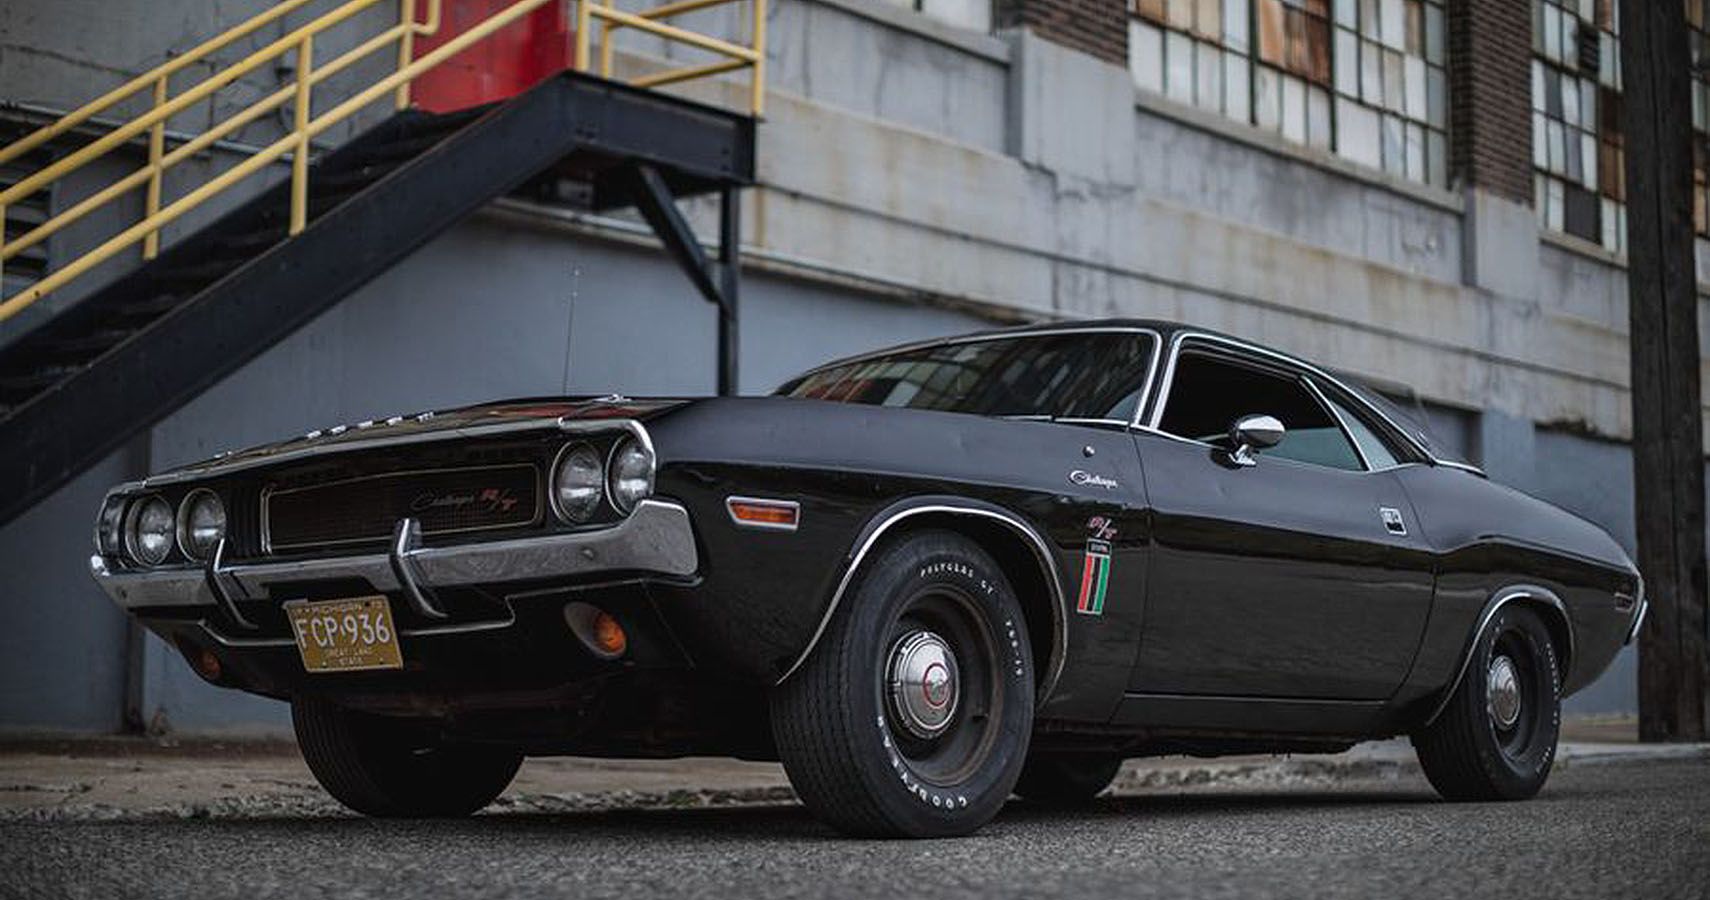 After Putting Terror In The Hearts Of All Muscle Cars In The ‘70s, The Black Ghost Vanished As Quietly As It Came